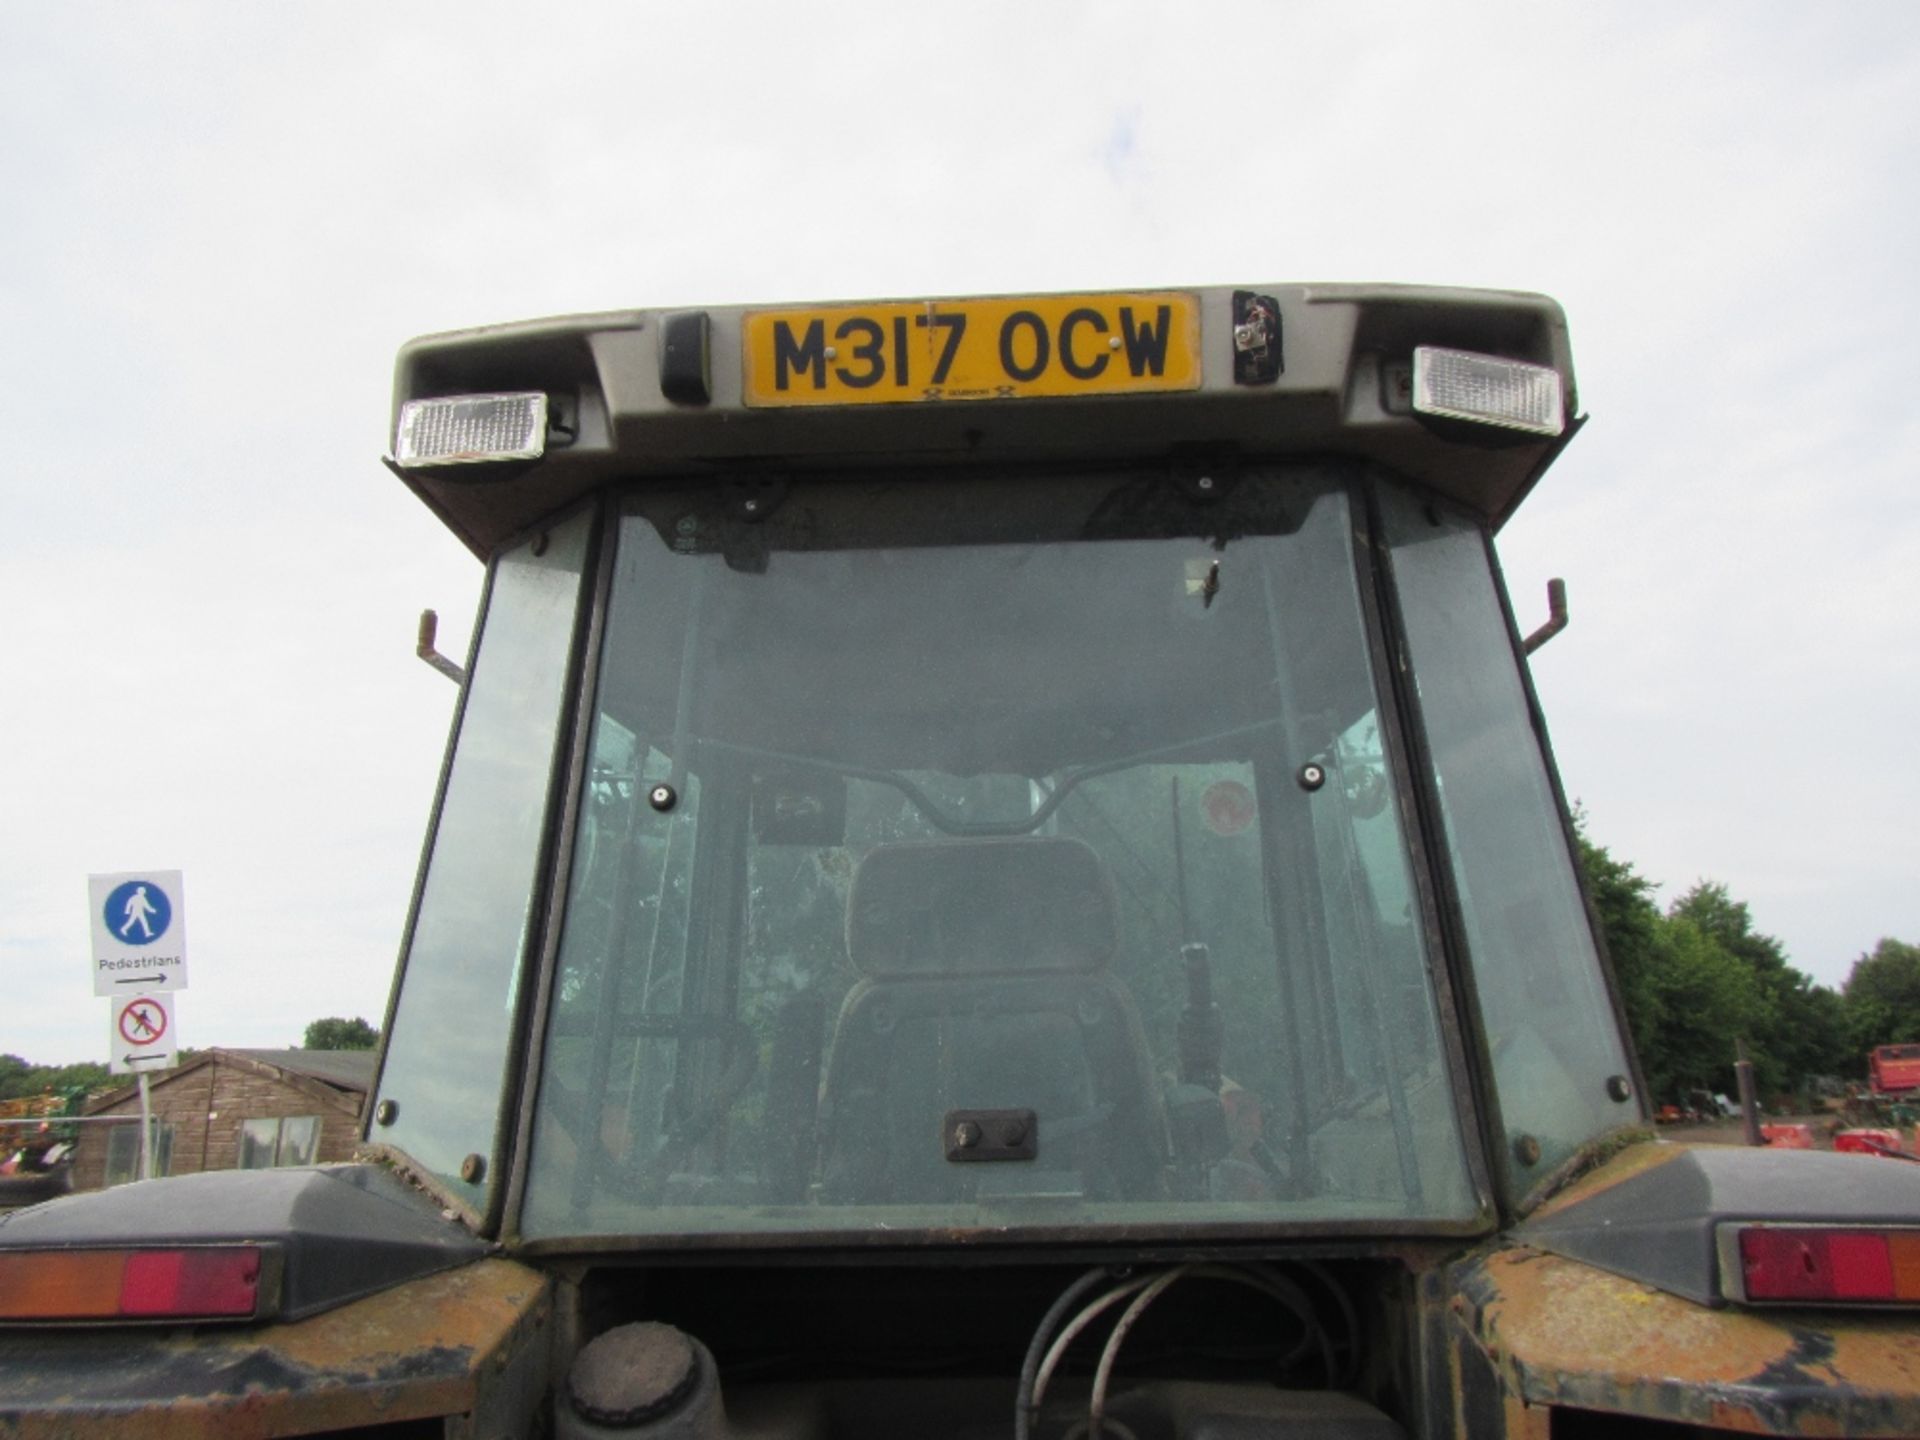 1994 Massey Ferguson 3090 4wd Tractor with Front Loader. Reg. No. M317 OCW Ser. No. C201010 - Image 8 of 17